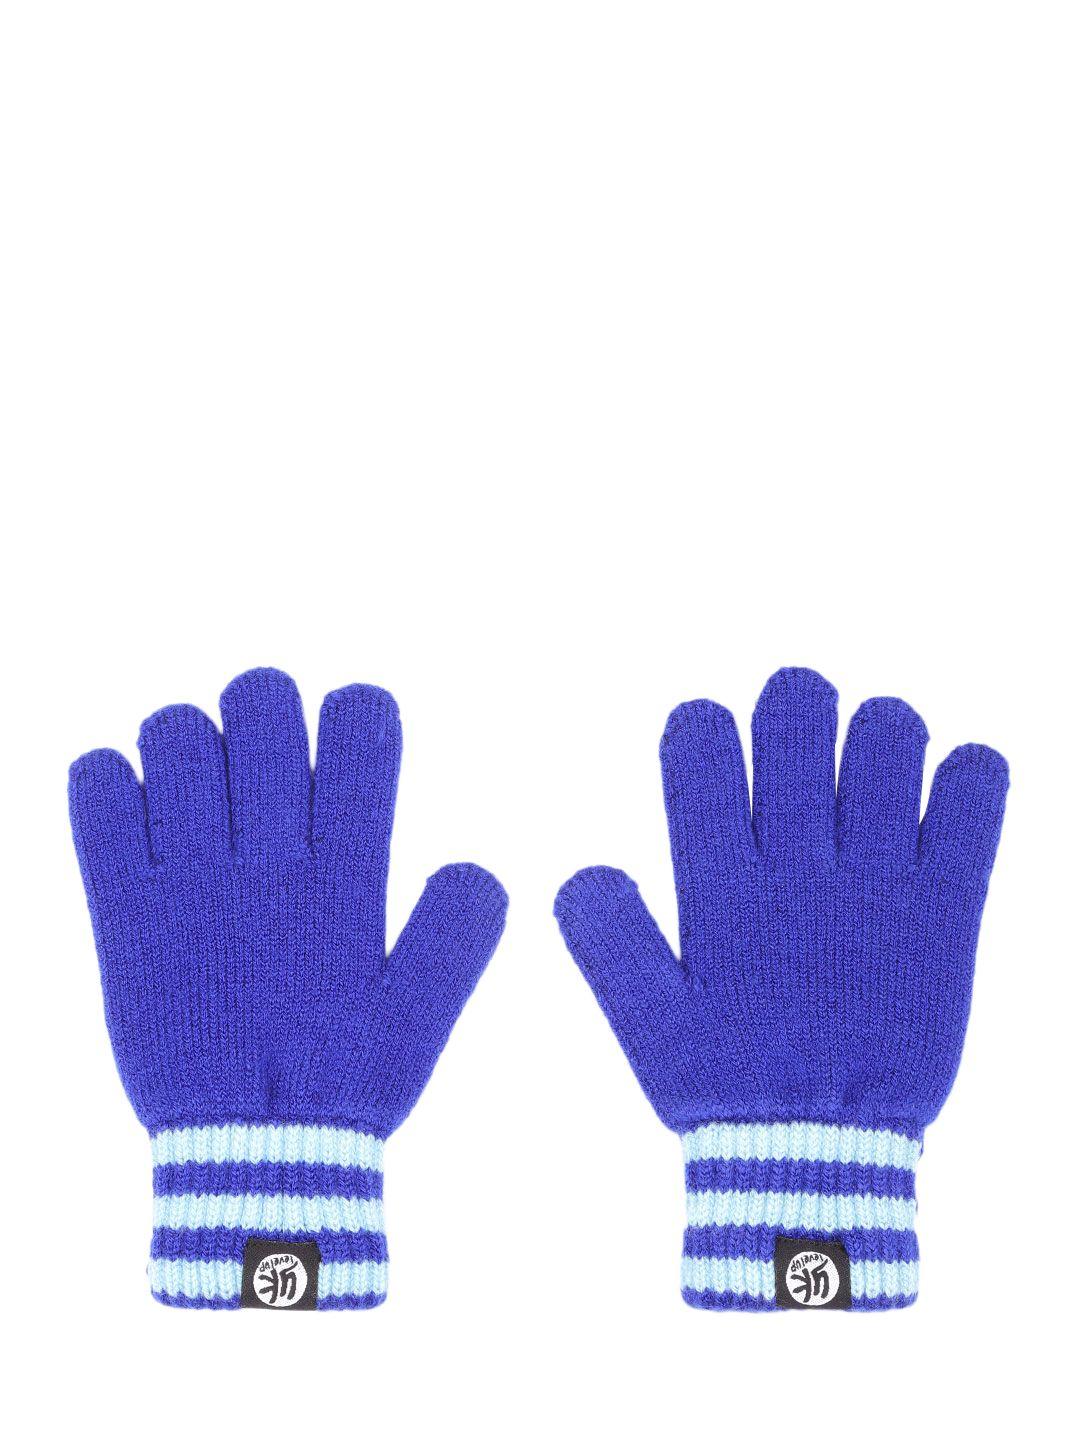 yk kids blue solid hand gloves with striped detail